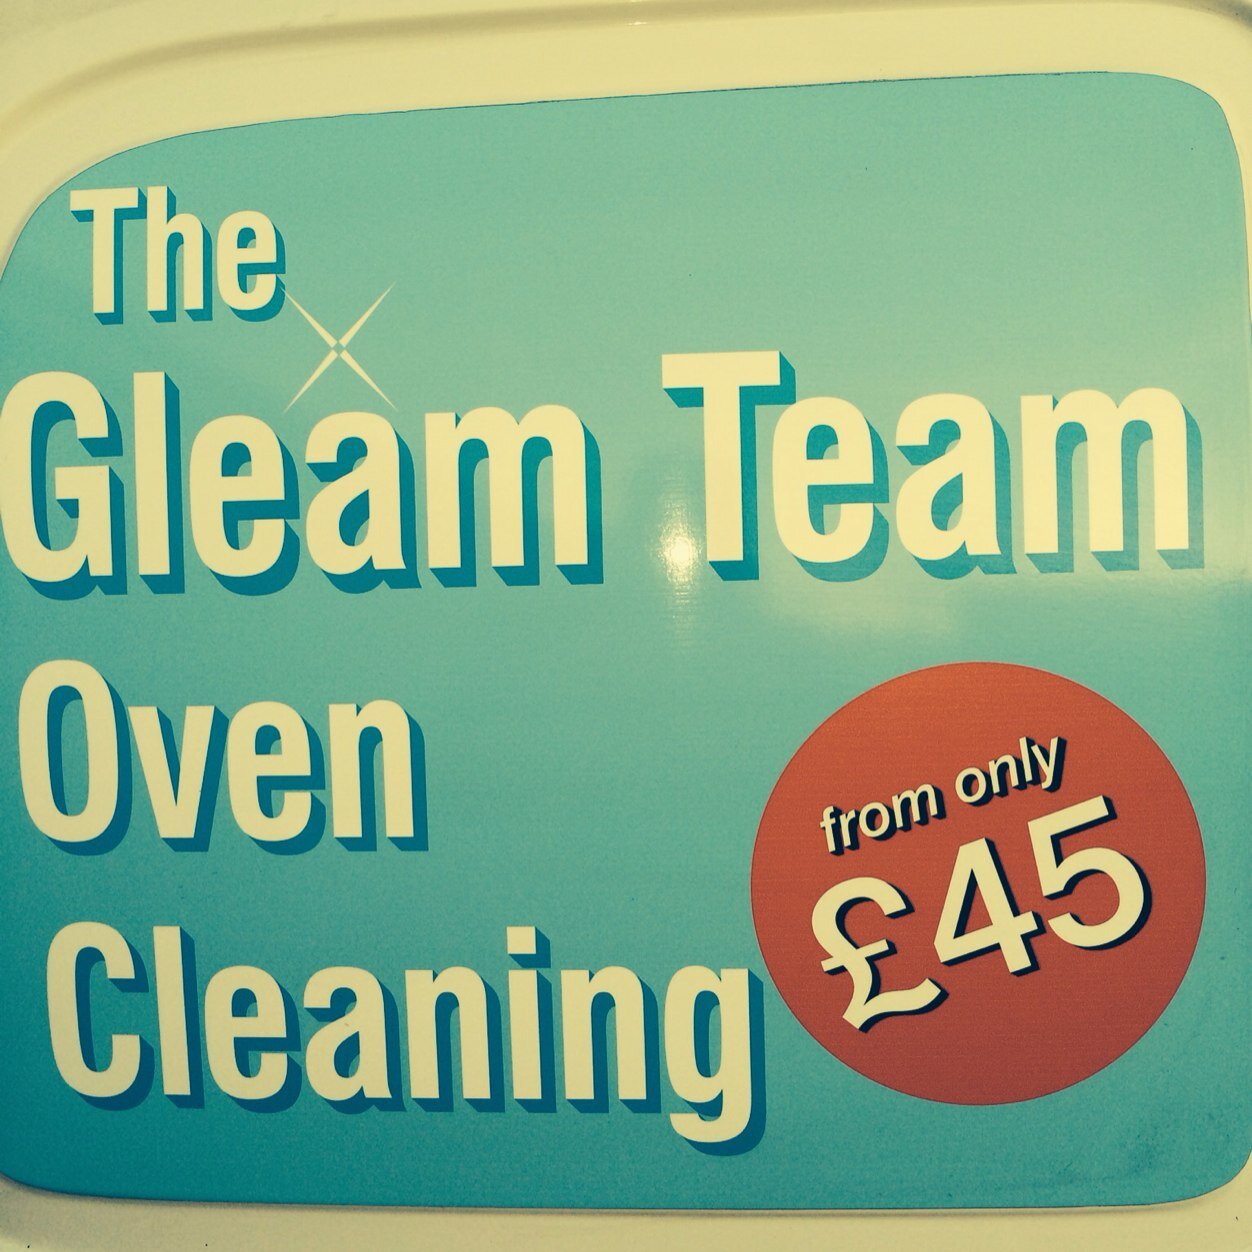 Wirral based oven cleaning specialists covering wirral liverpool and chester